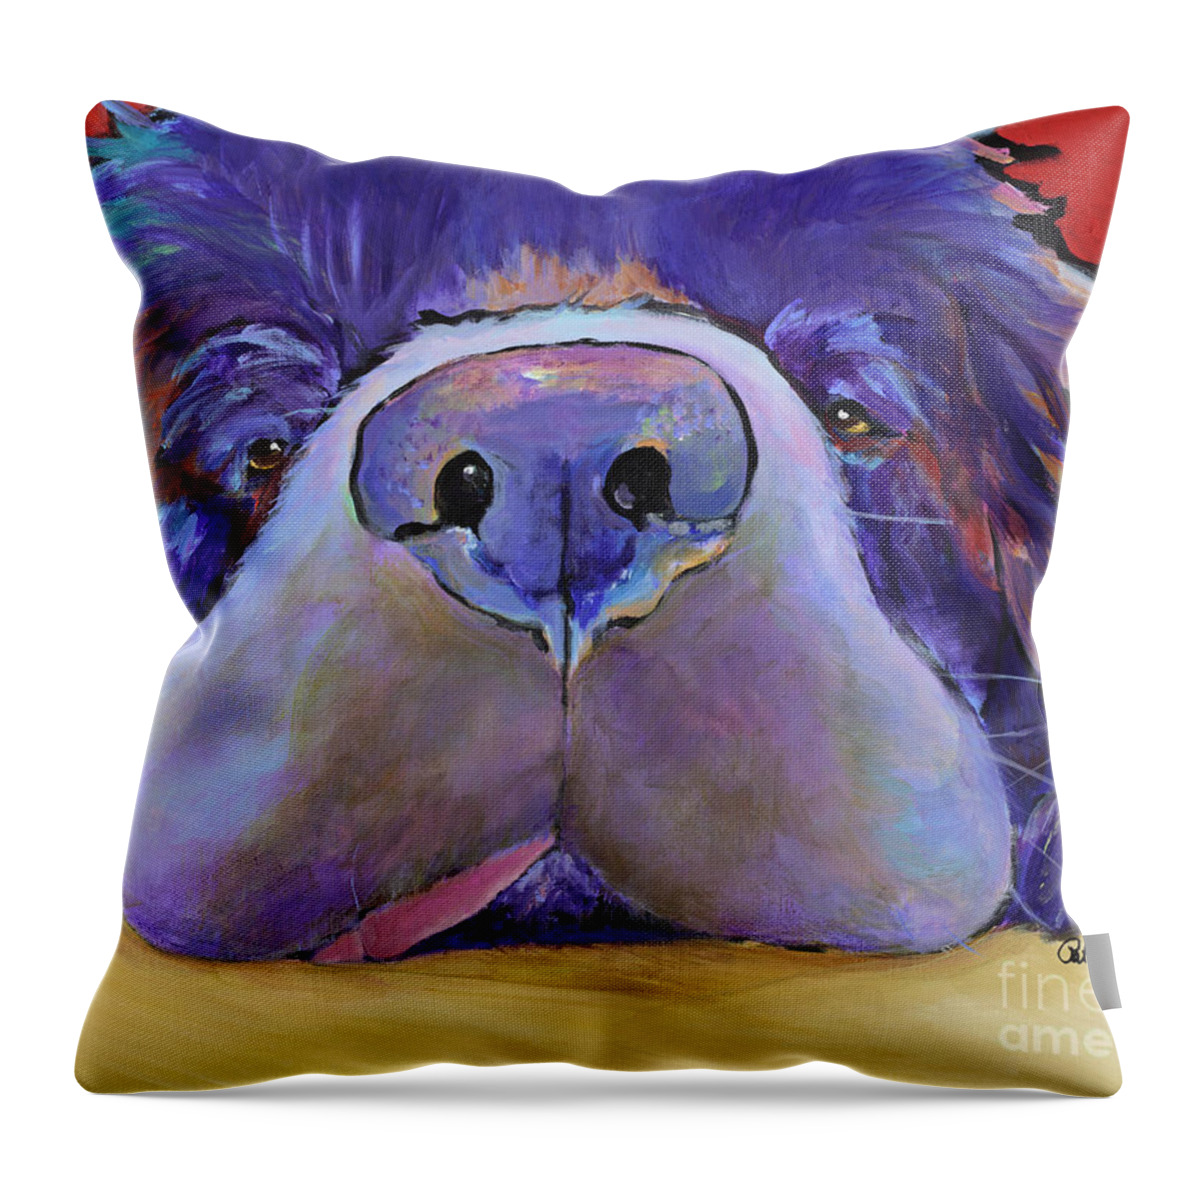 Pat Saunders-white Canvas Prints Throw Pillow featuring the painting Graysea by Pat Saunders-White